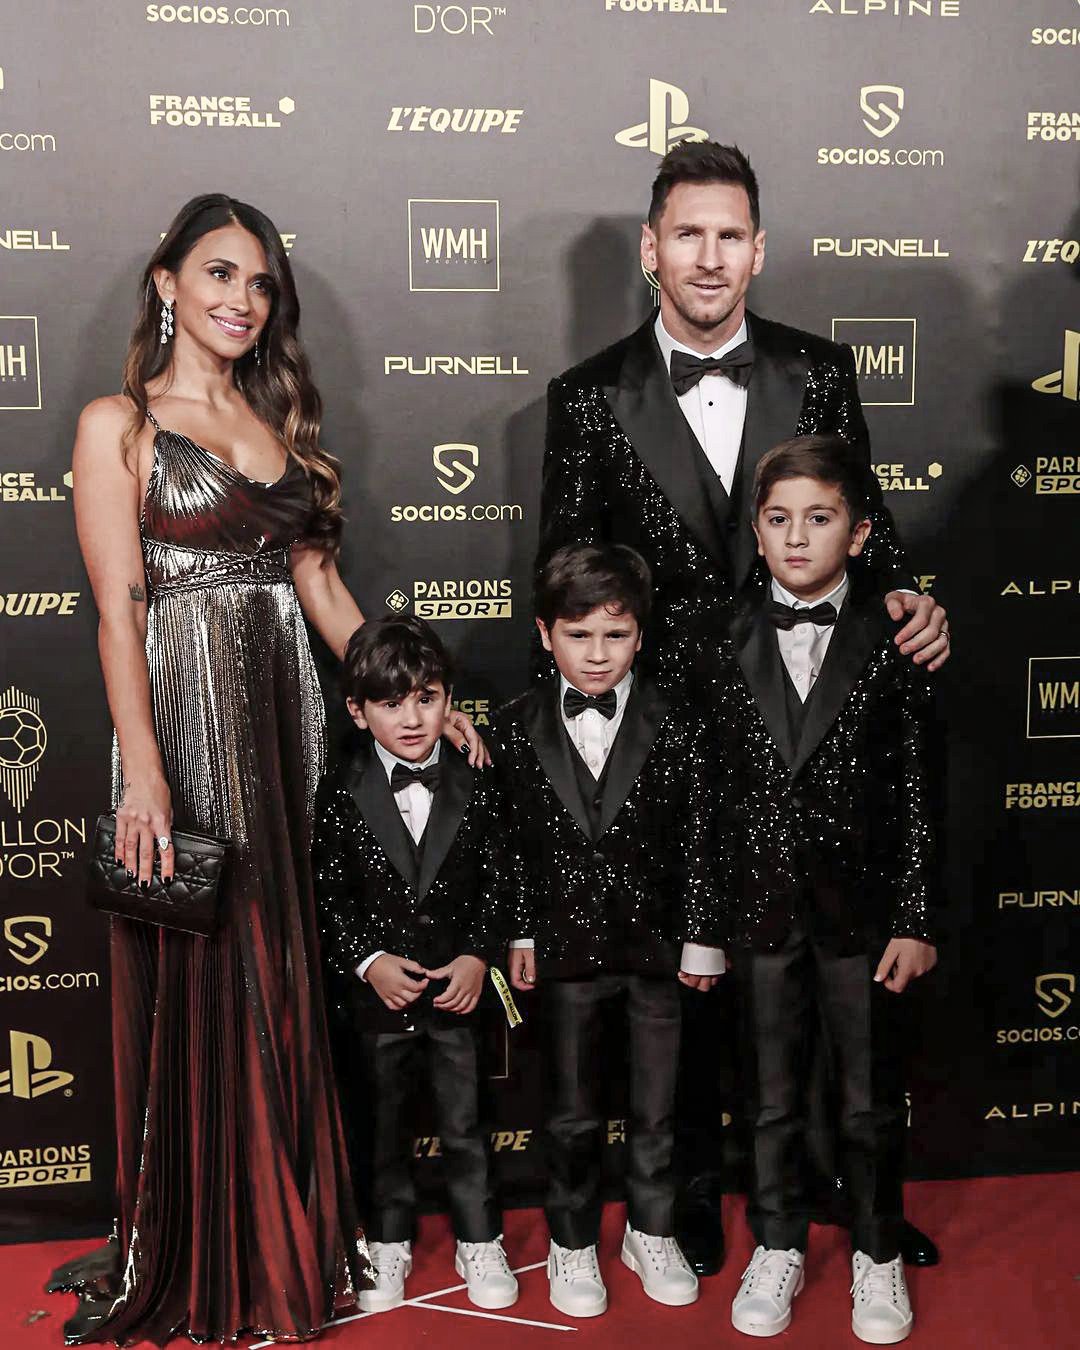 Leo Messi 2021 Ballon d'Or wallpapers